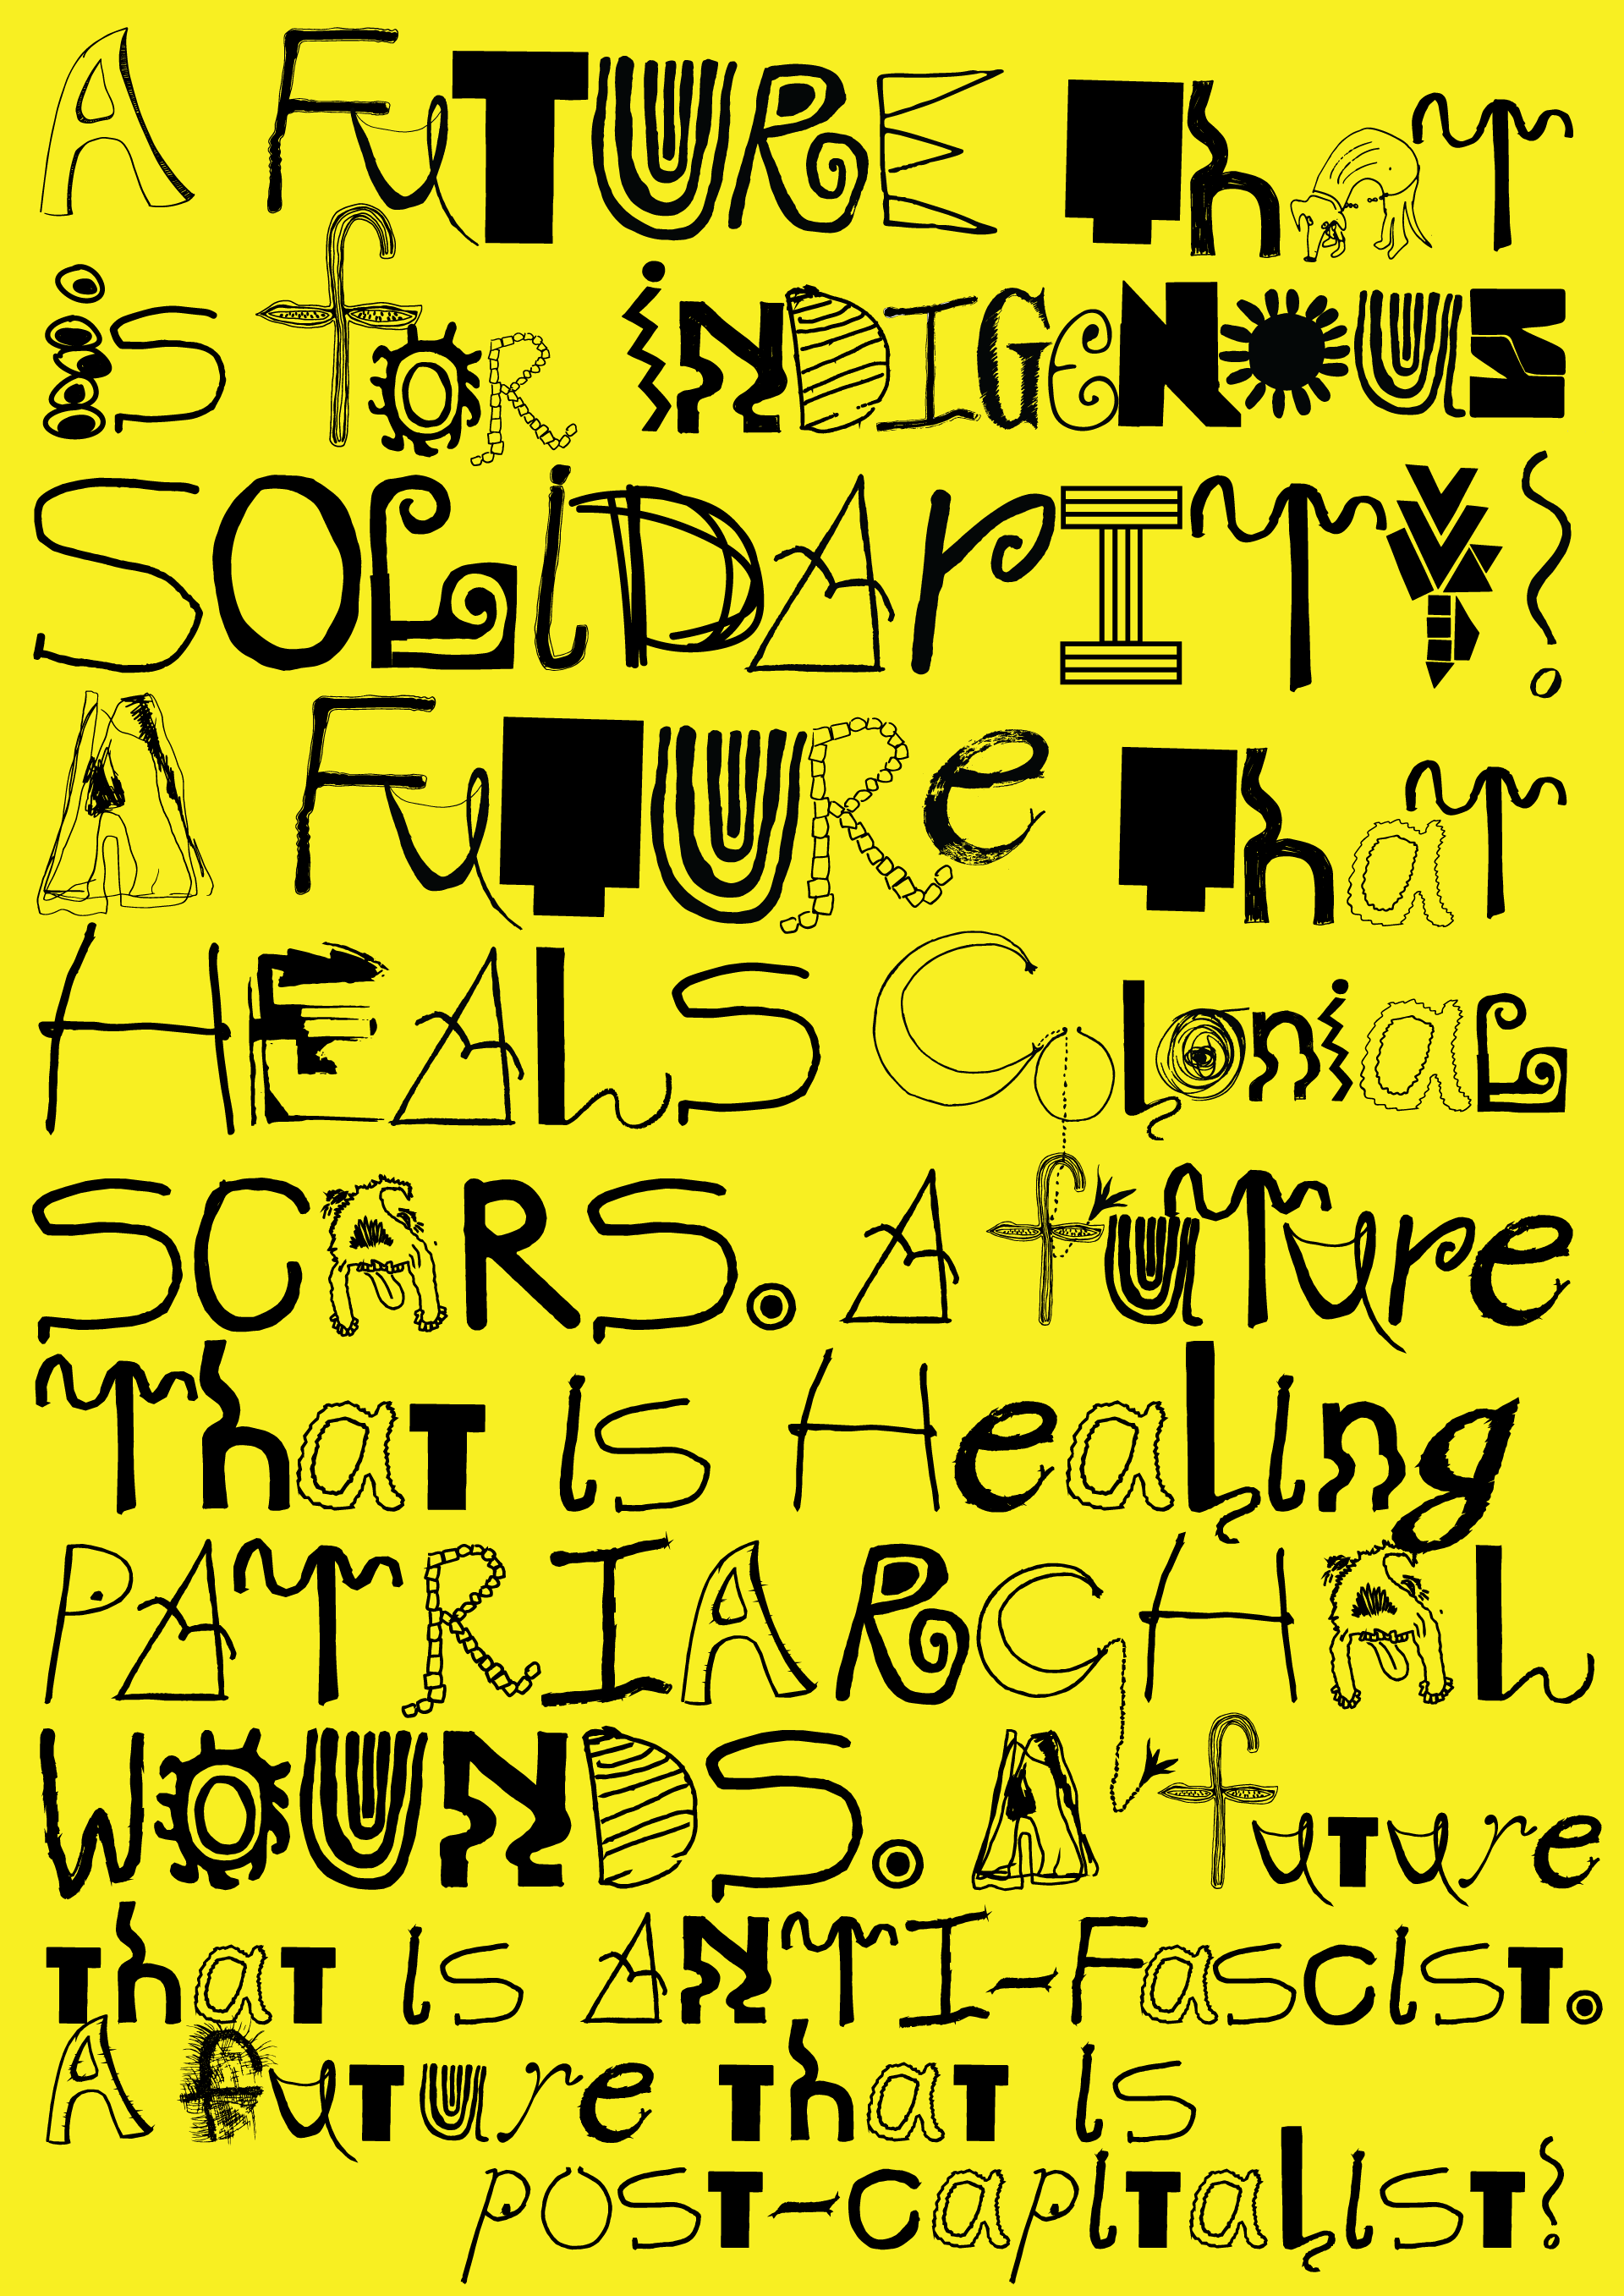 yellow poster manifesto featuring ideas and statements